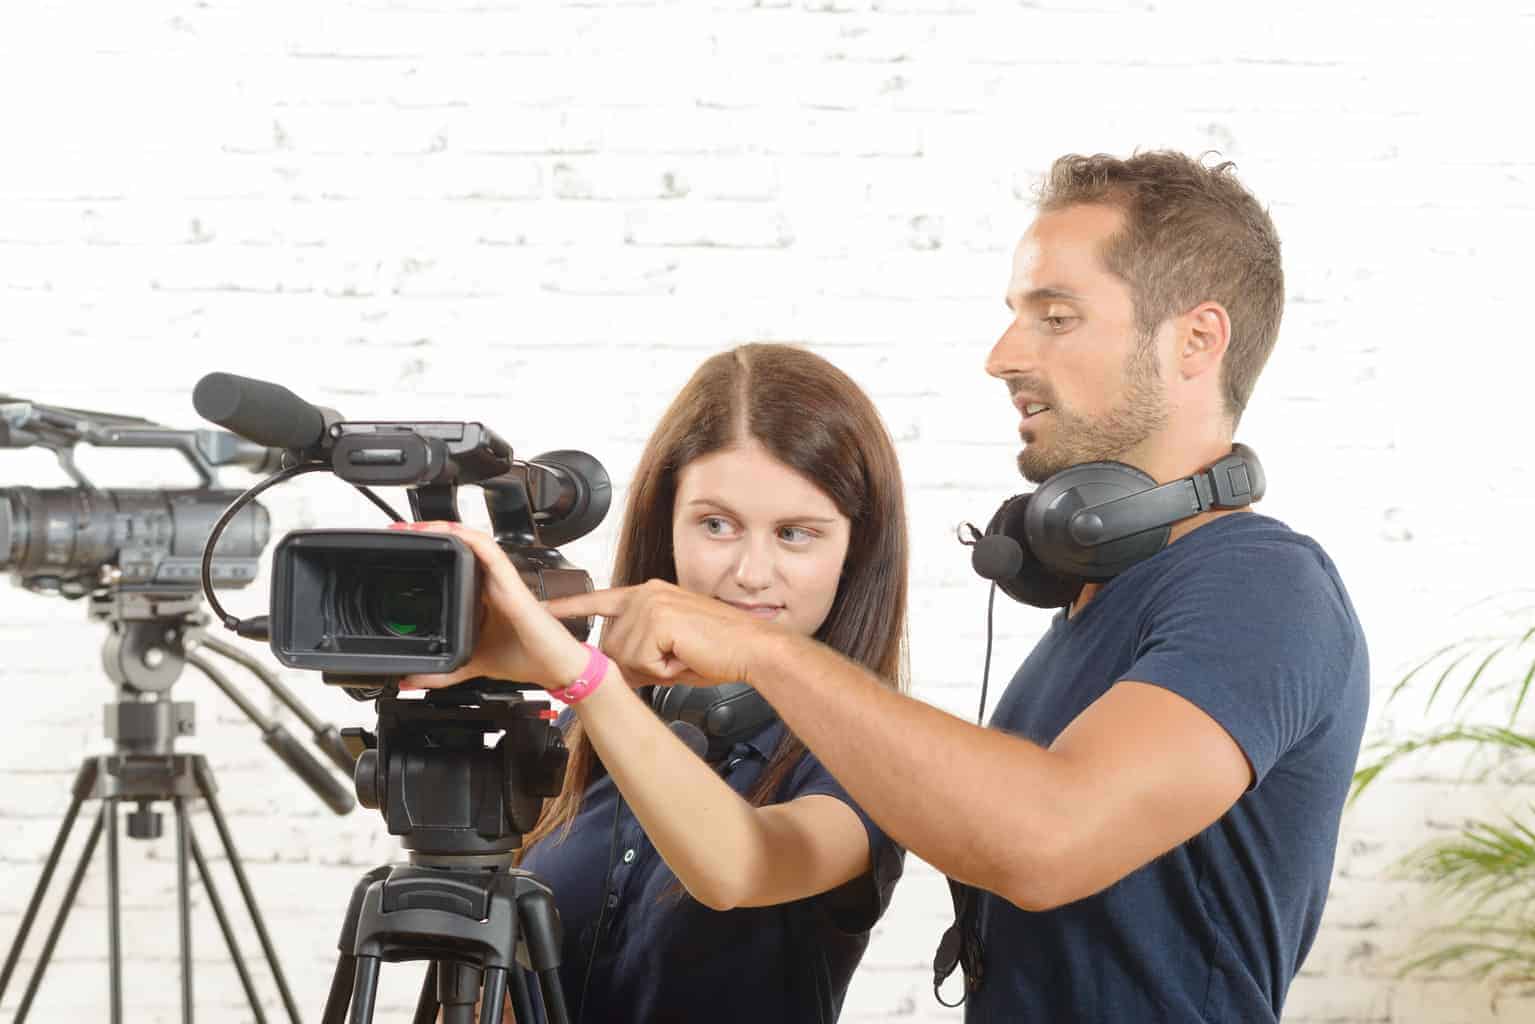 7 Viral Video Ideas For Your Business